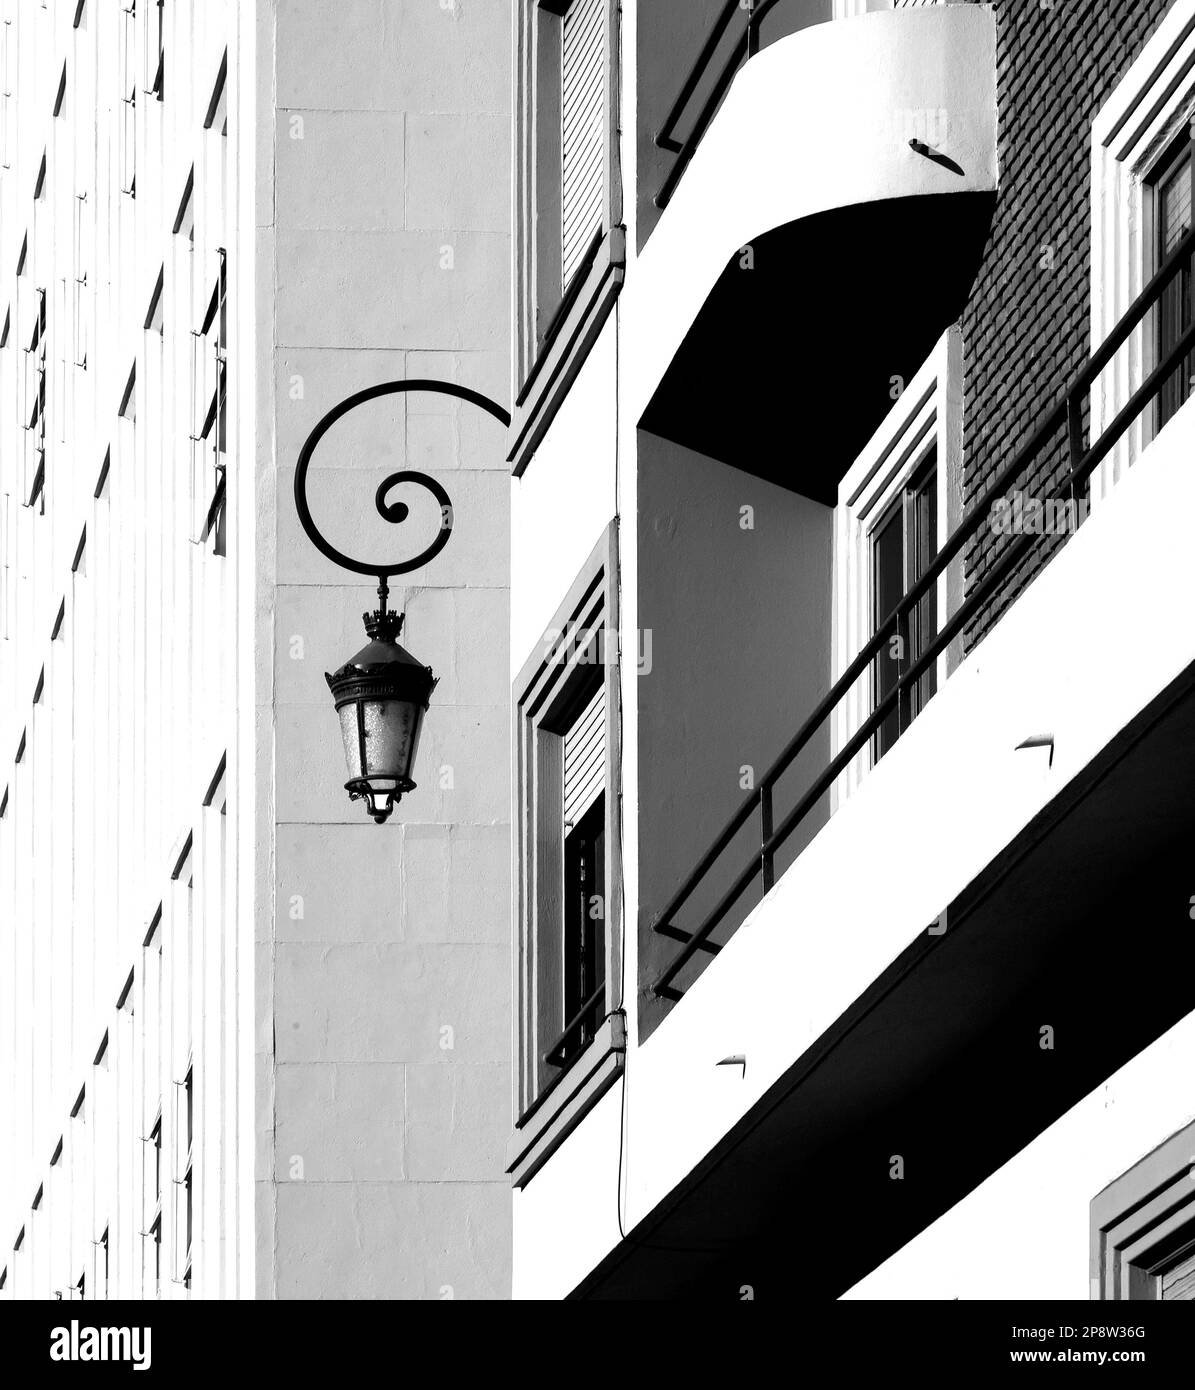 Shot in black and white detail on the facade of this historic building representing some character, animal or flower. Set at León, Castilla y León, Stock Photo